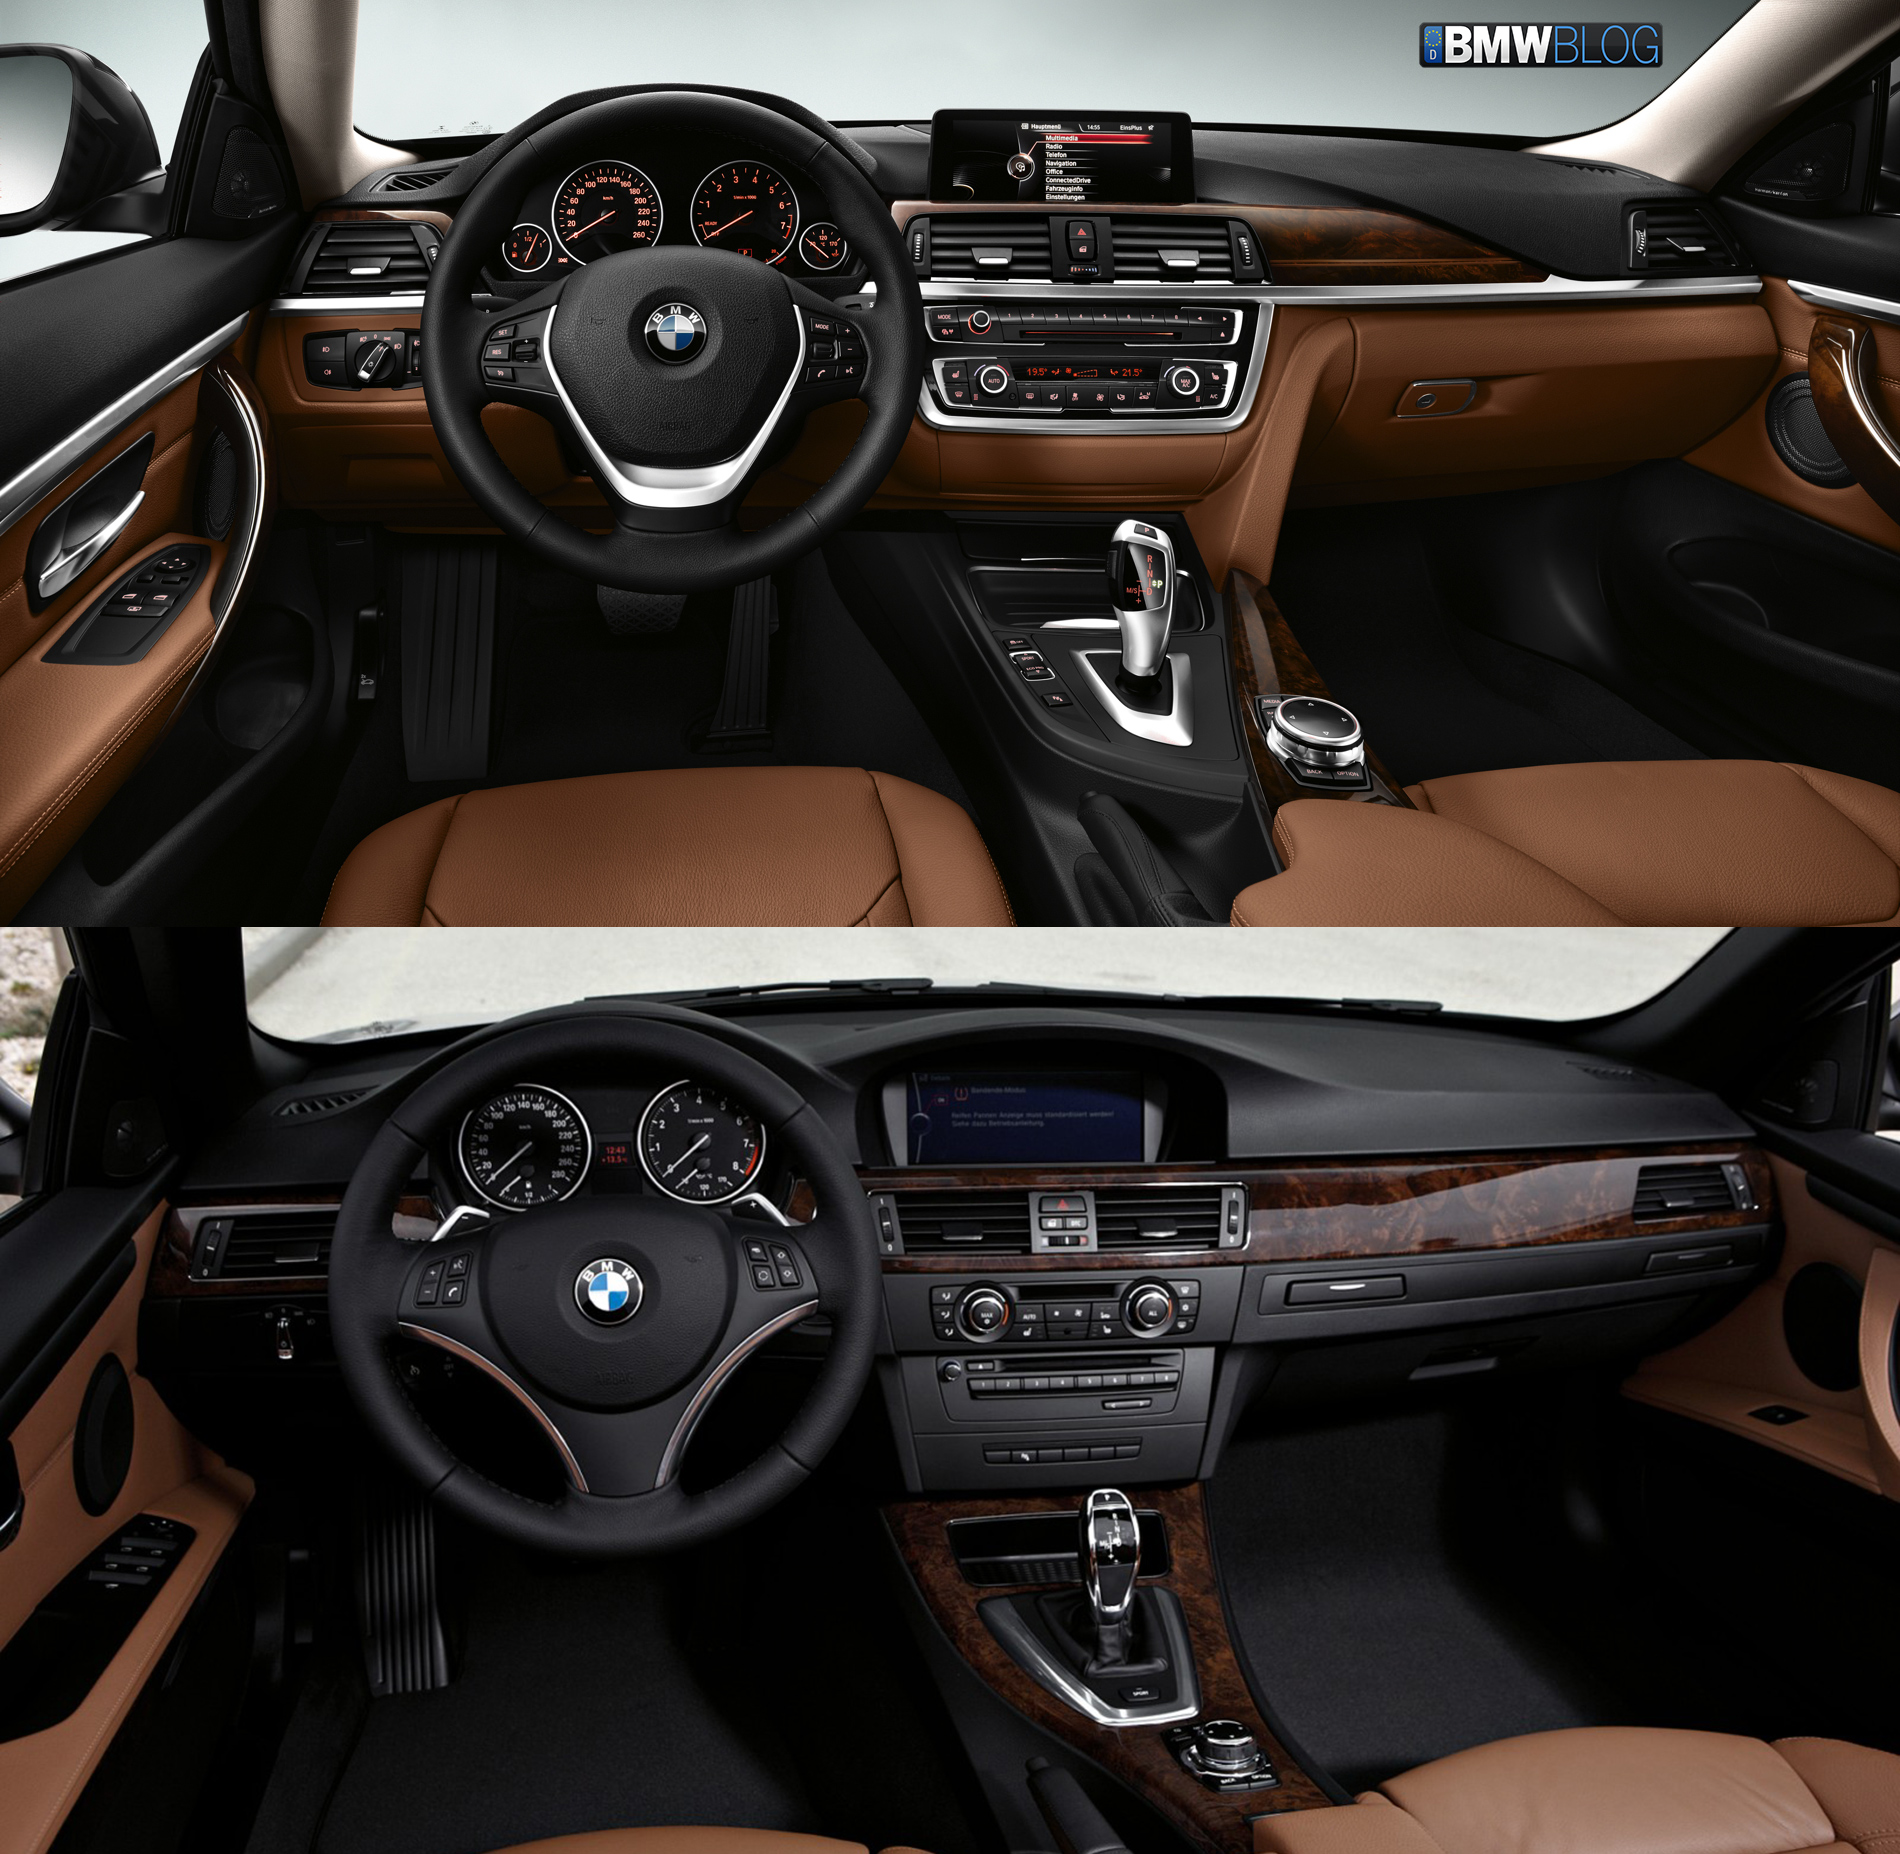 bmw 4 series coupe vs bmw 3 series coupe interior1